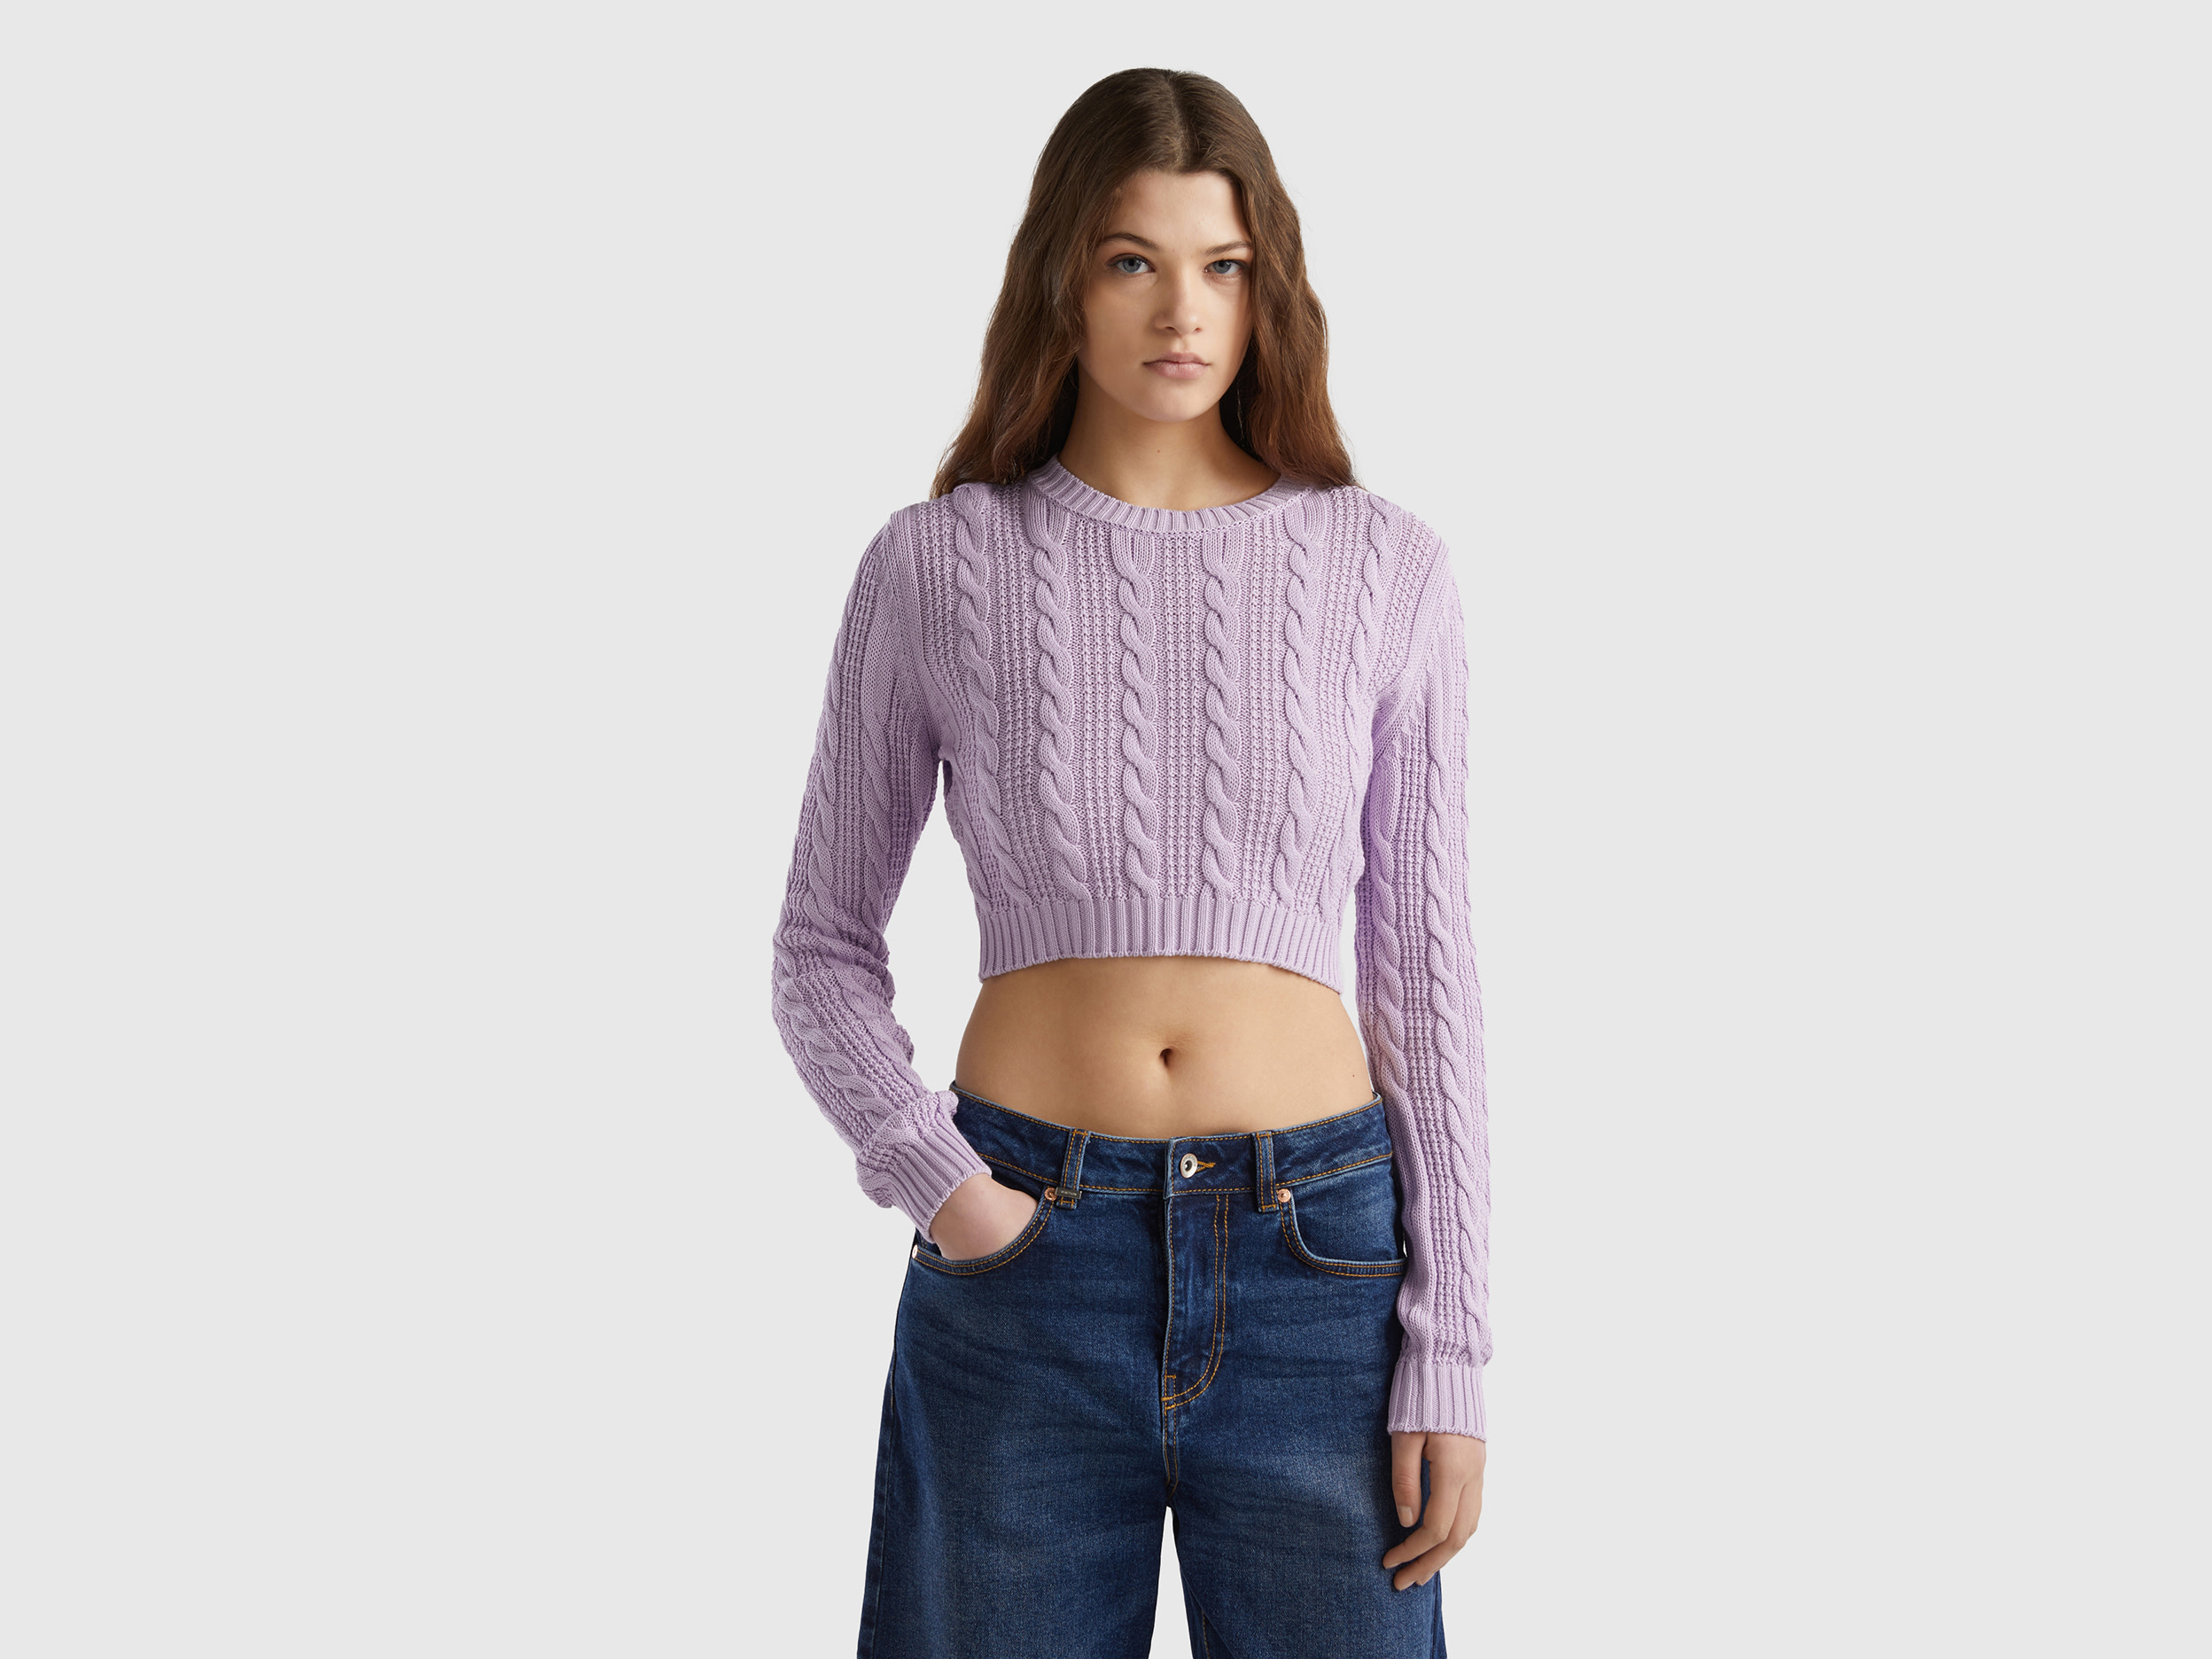 Benetton, Cropped Cable Knit Sweater, size XS-S, Lilac, Women